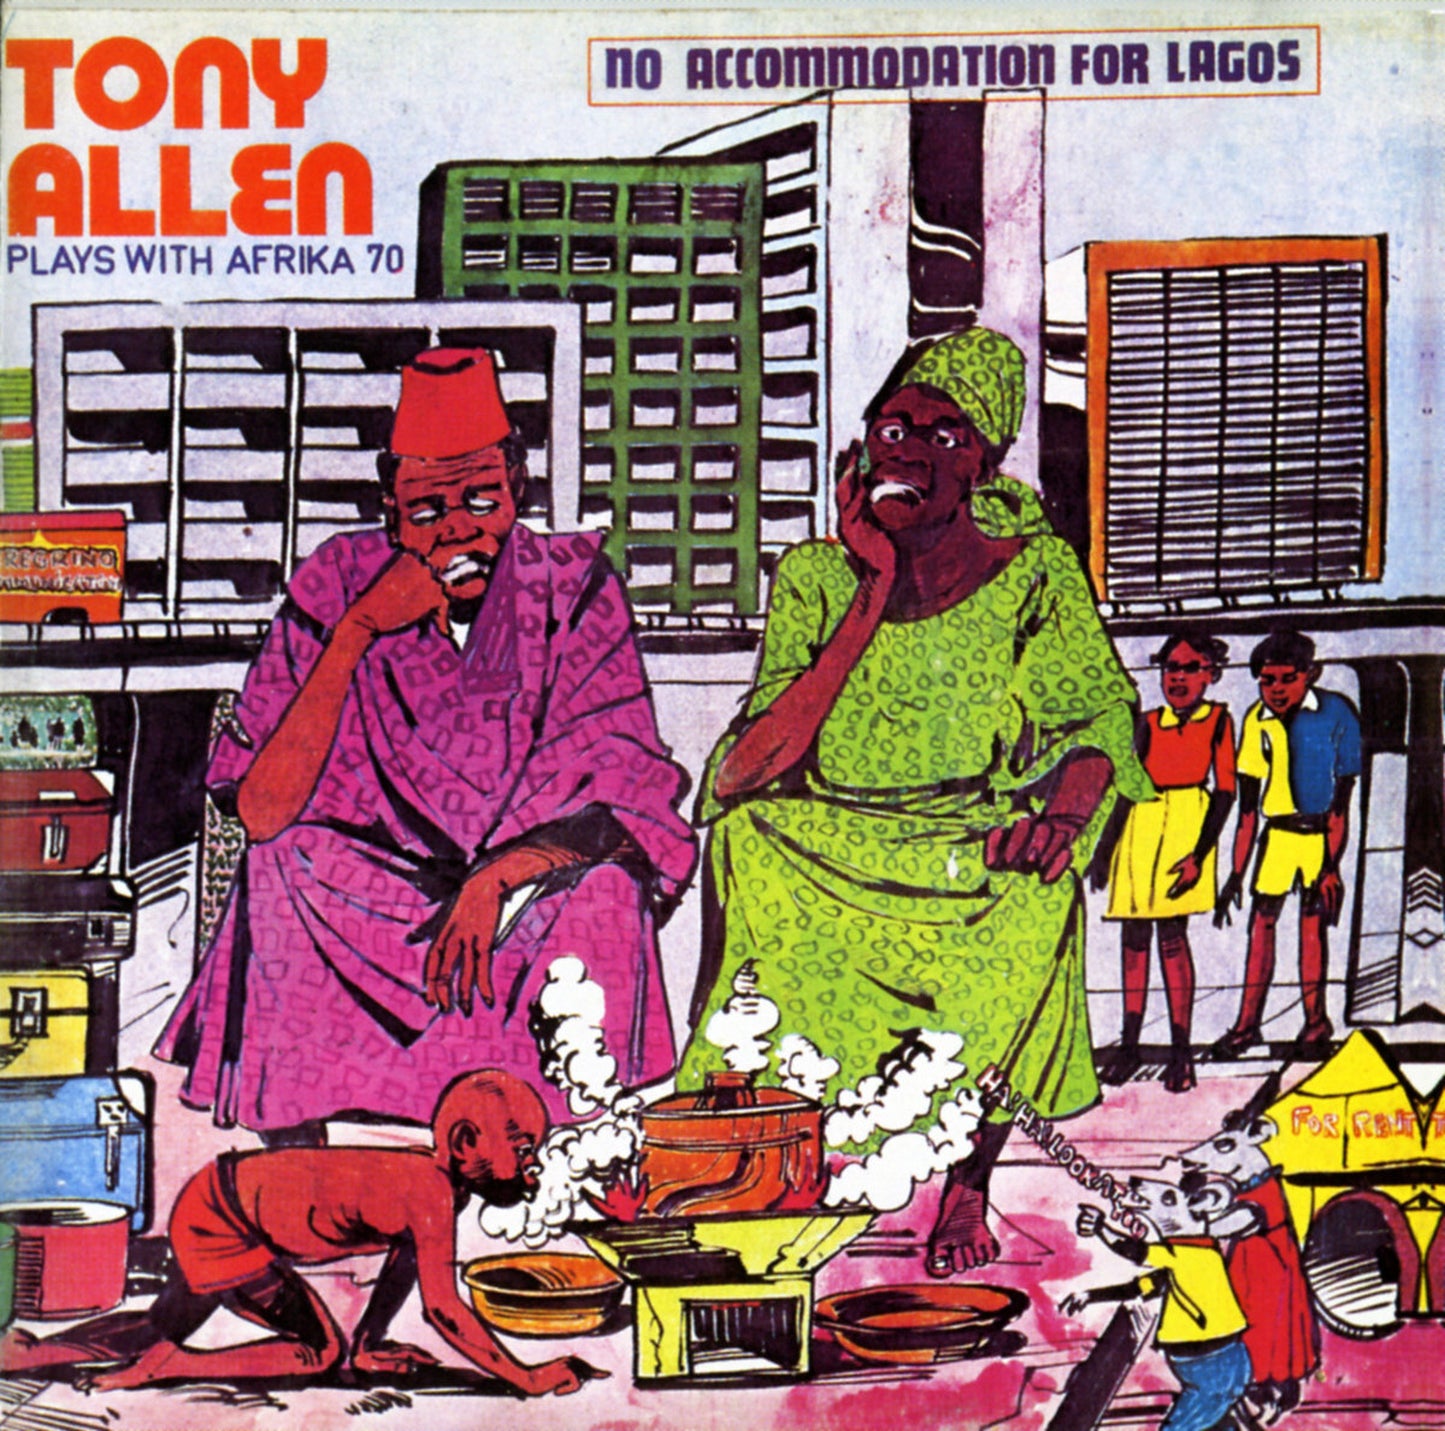 【LP】Tony Allen Plays With Afrika 70 - No Accommodation for Lagos